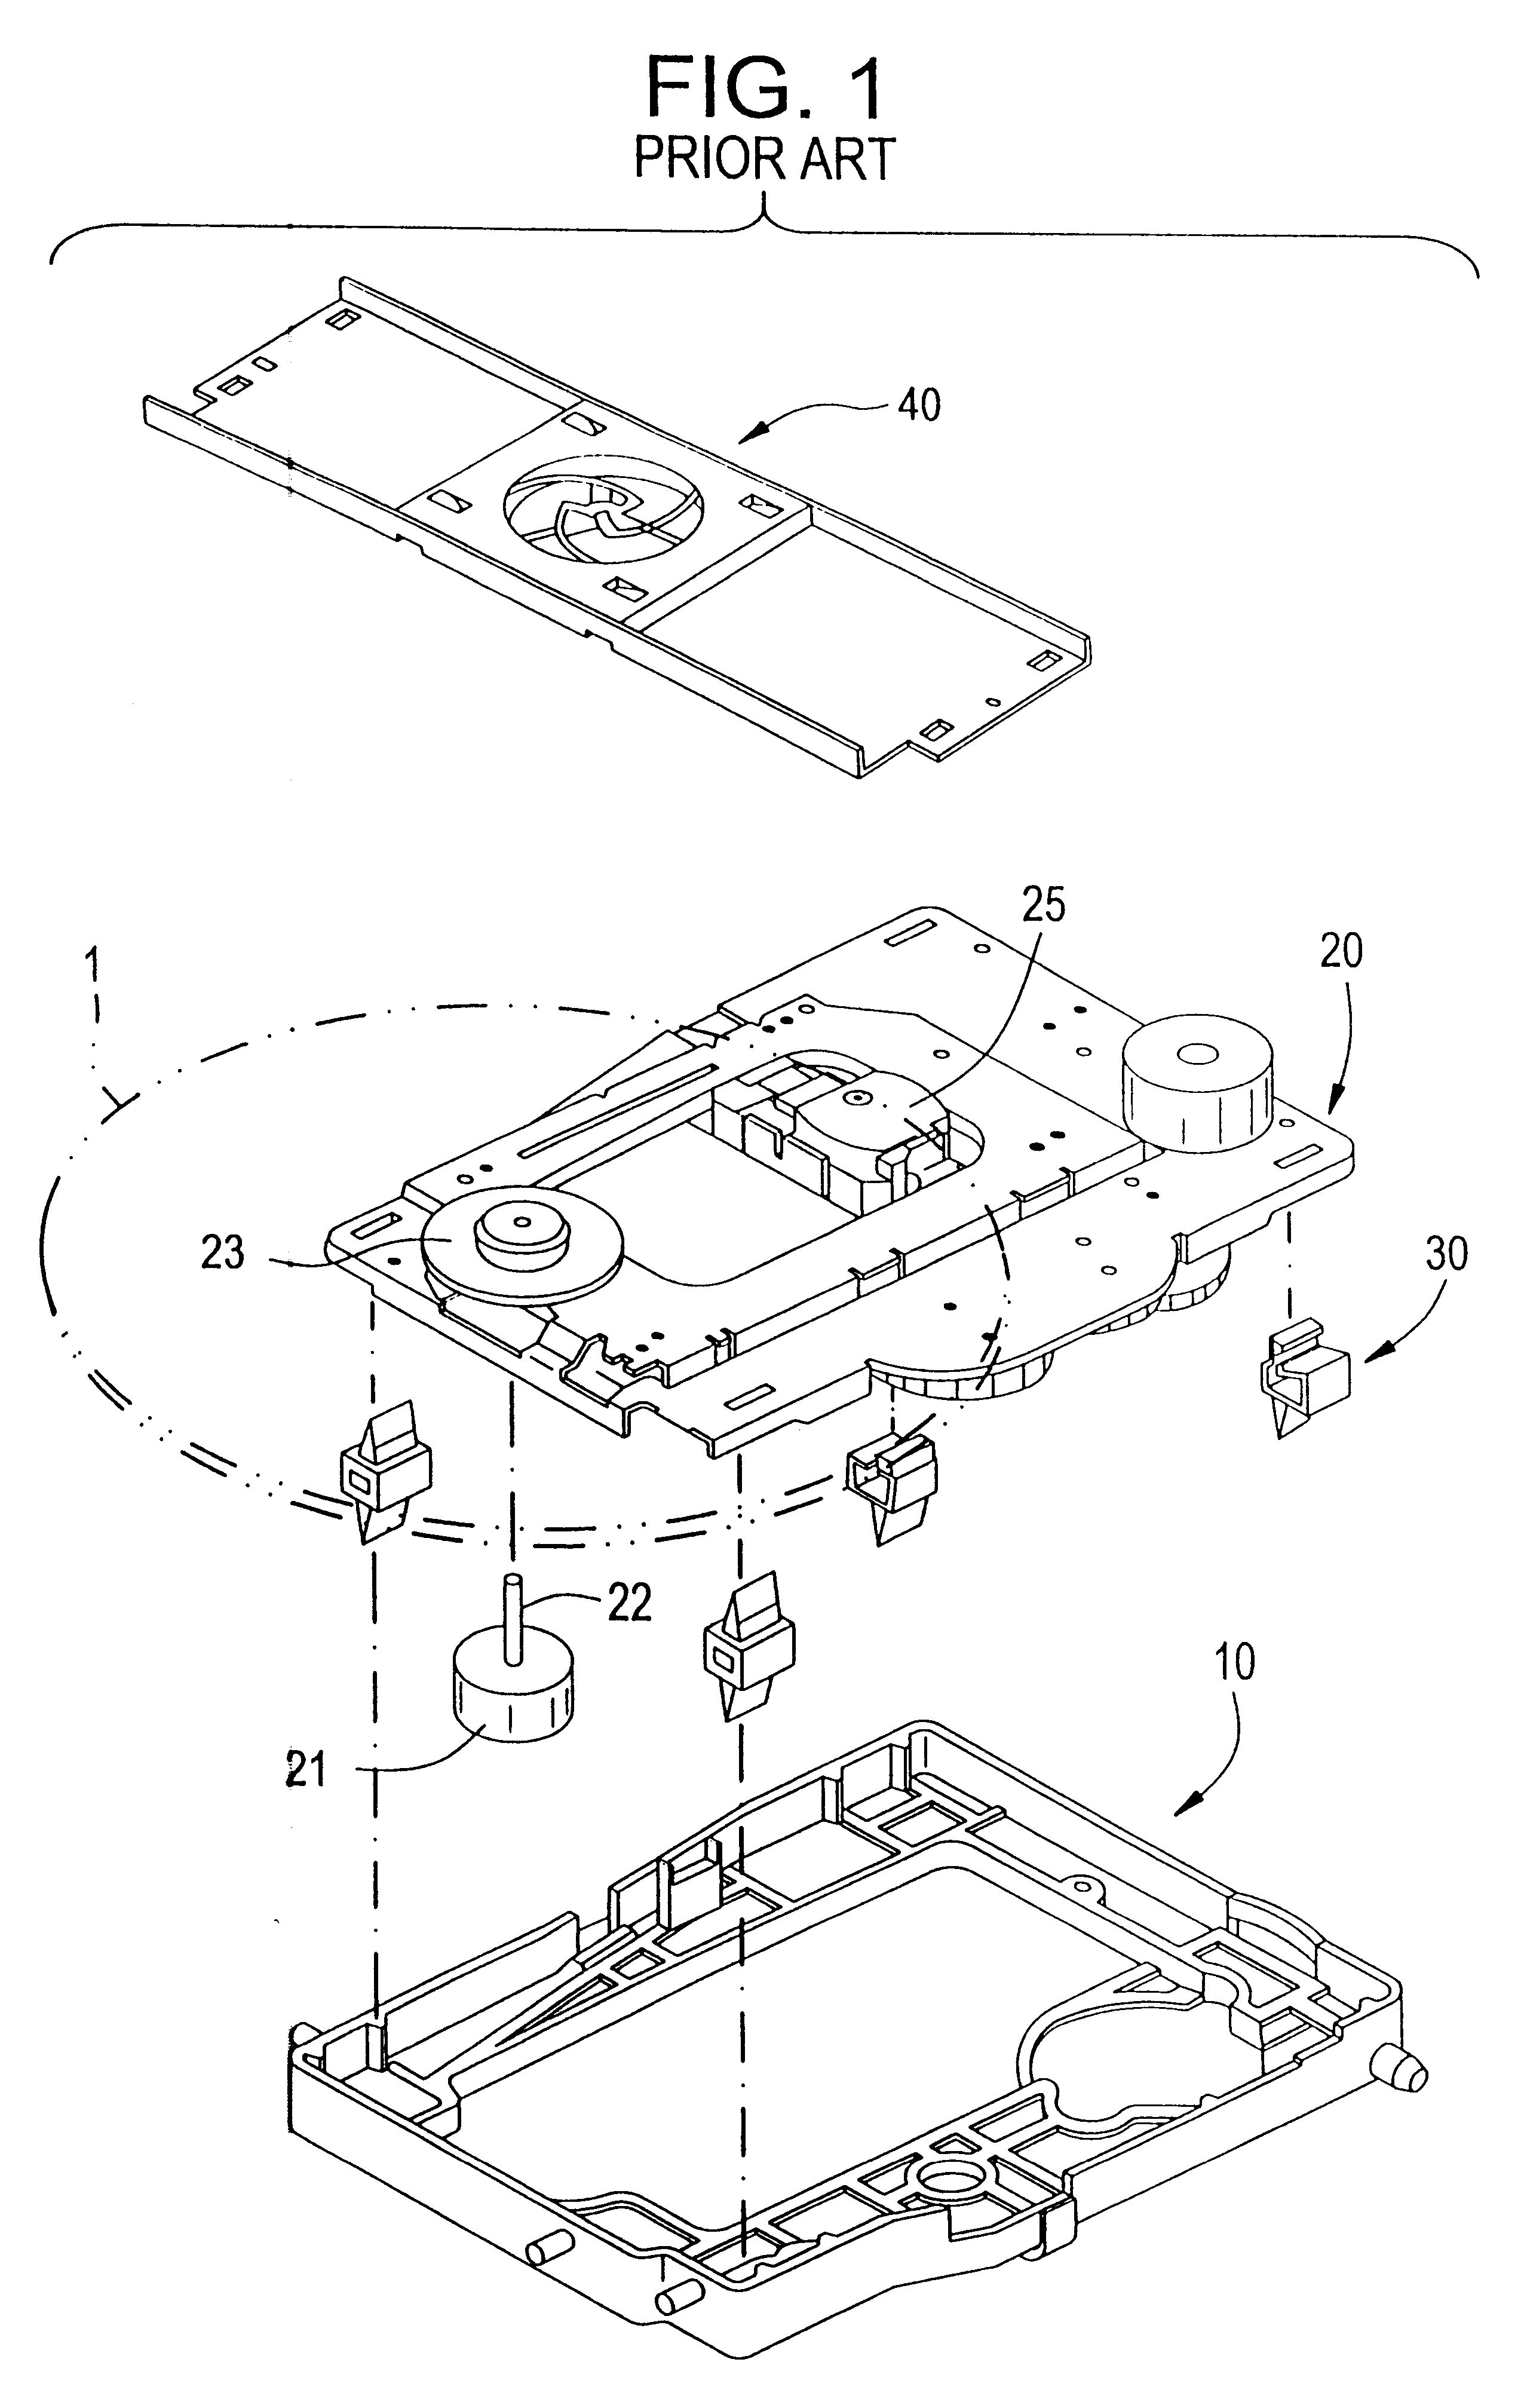 Disk player, and turntable incorporating self-compensating dynamic balancer, clamper incorporating self-compensating dynamic balancer and spindle motor incorporating self-compensating dynamic balancer adopted for disk player